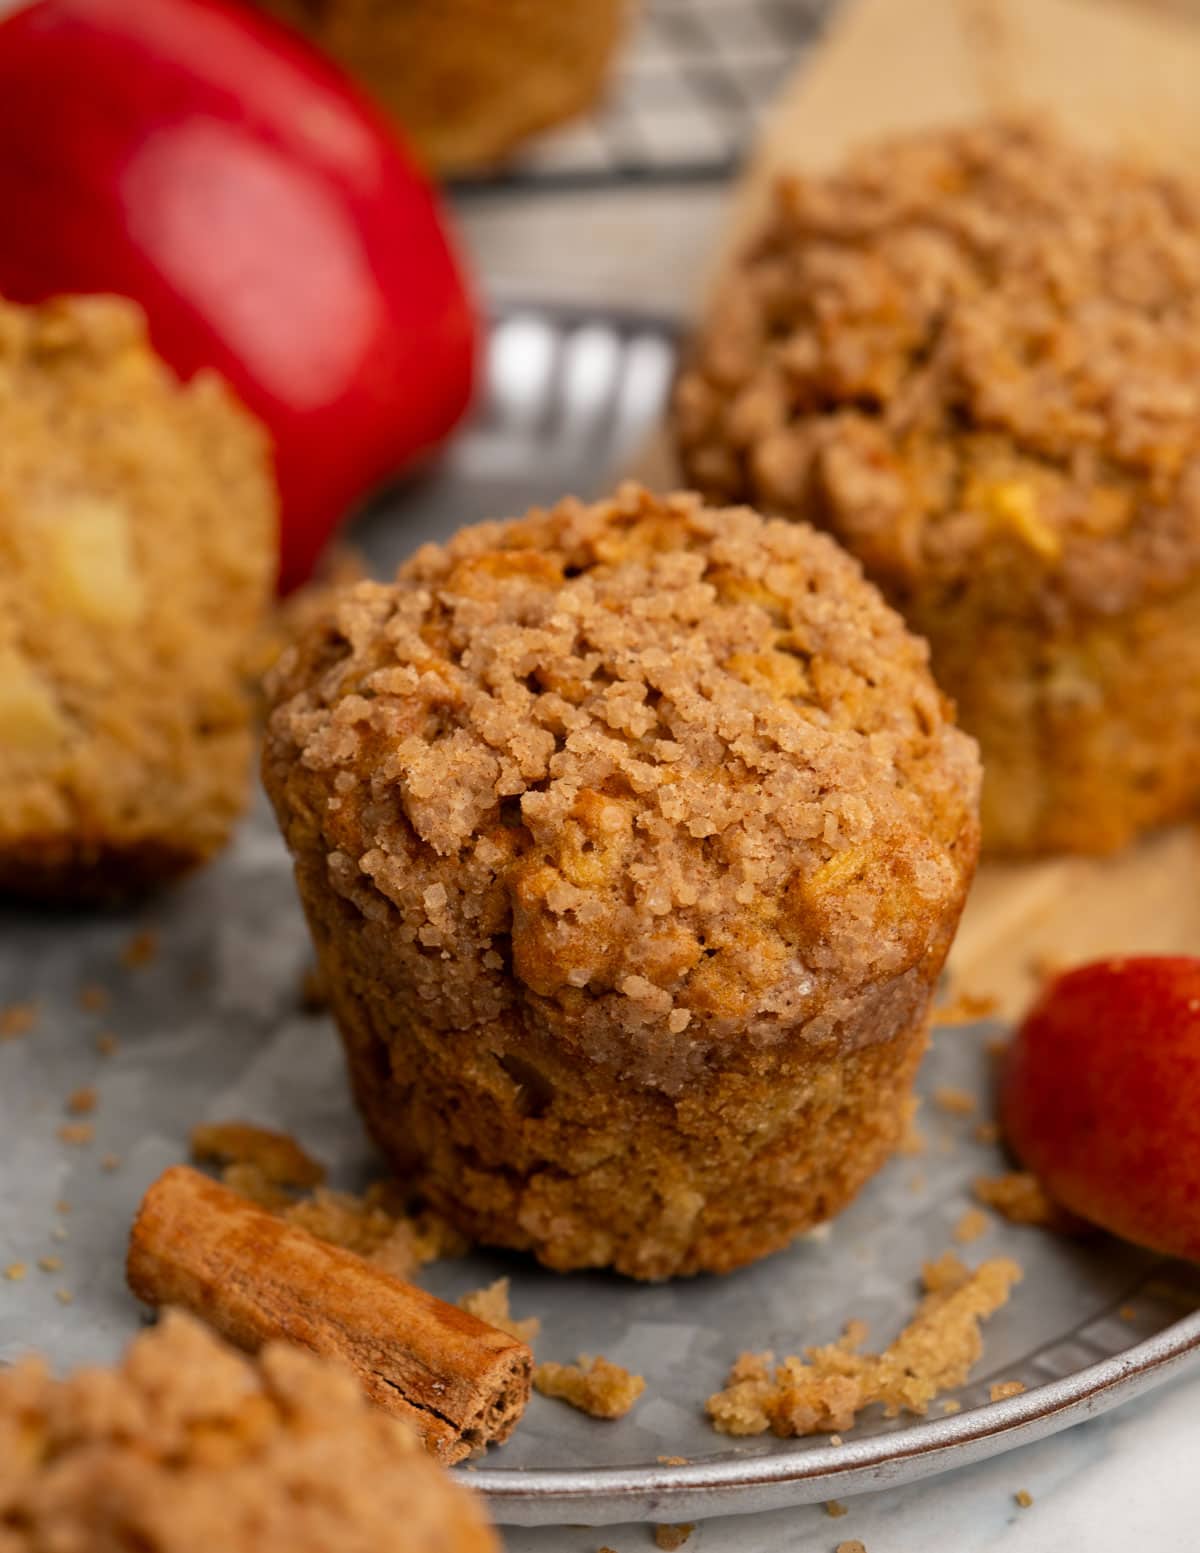 Cinnamon apple muffin with crunchy cinnamon sugar topping, having chunks of apple and is tender and light inside.